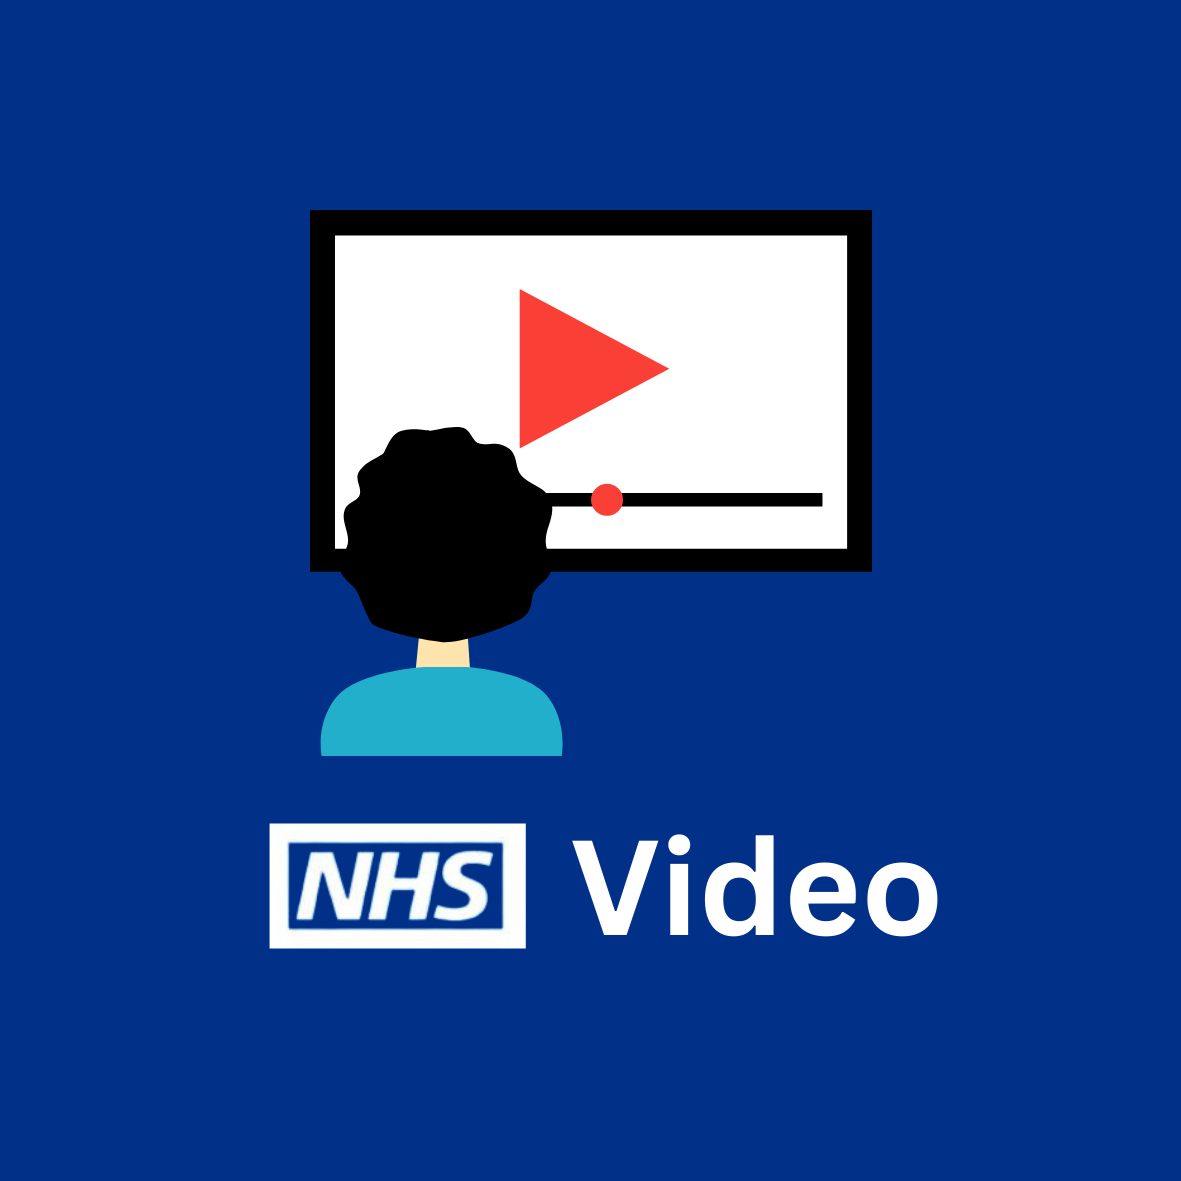 Image of Someone Watching Video with NHS Logo and Word 'Video'